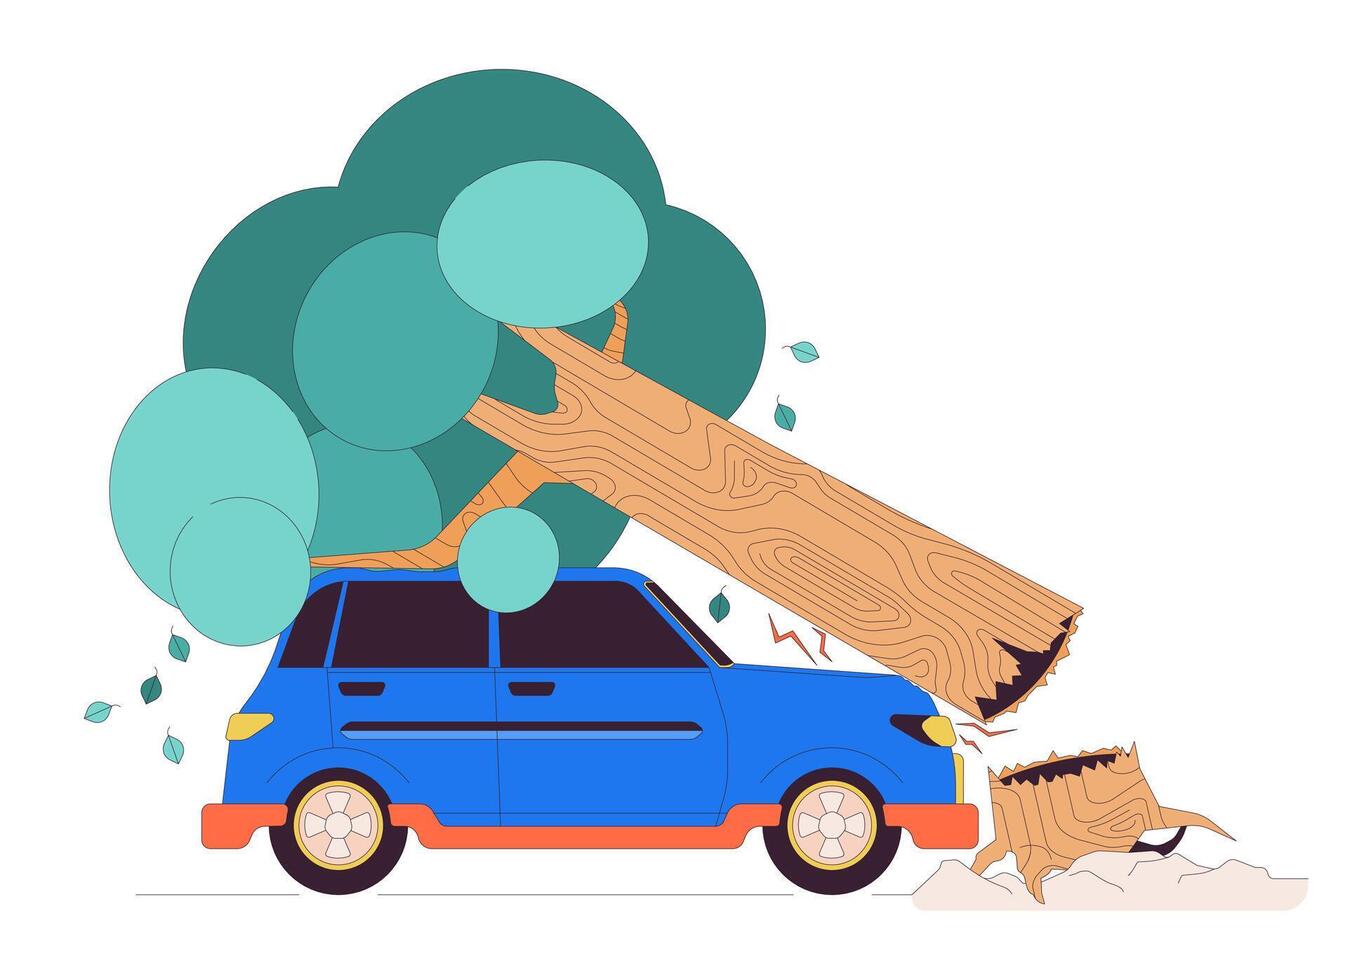 Tree falling down onto car line cartoon flat illustration. Auto damaged by plant trunk 2D lineart objects isolated on white background. Road accident at stormy weather scene color image vector